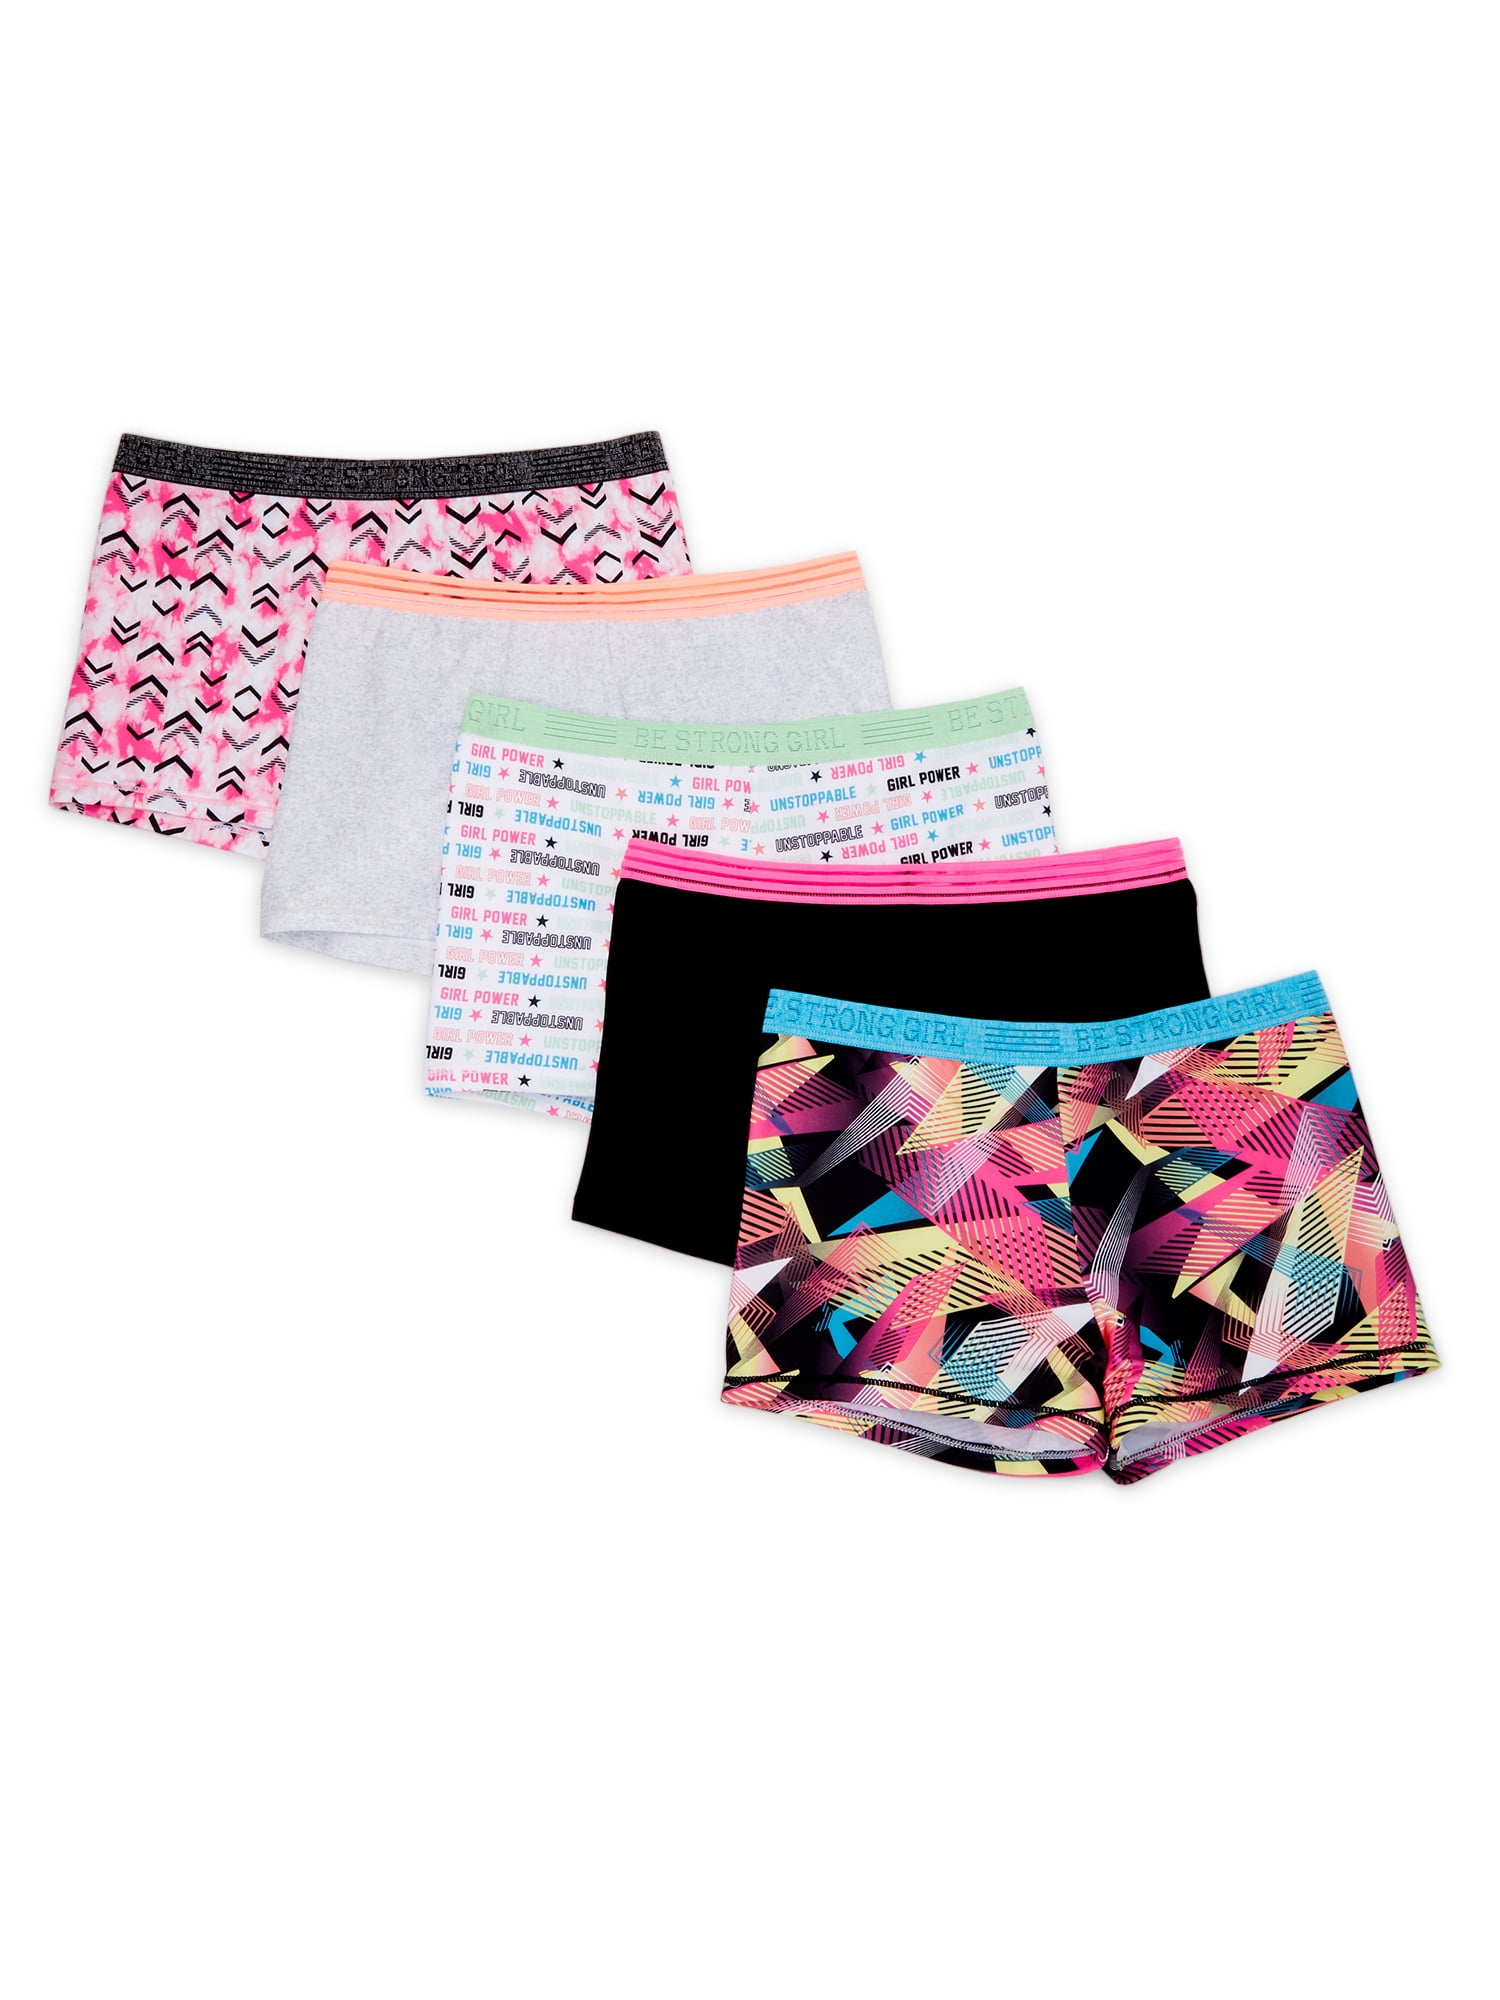 Tenn Ladies Deluxe Padded Cycling/Equestrian Undershorts Boxers